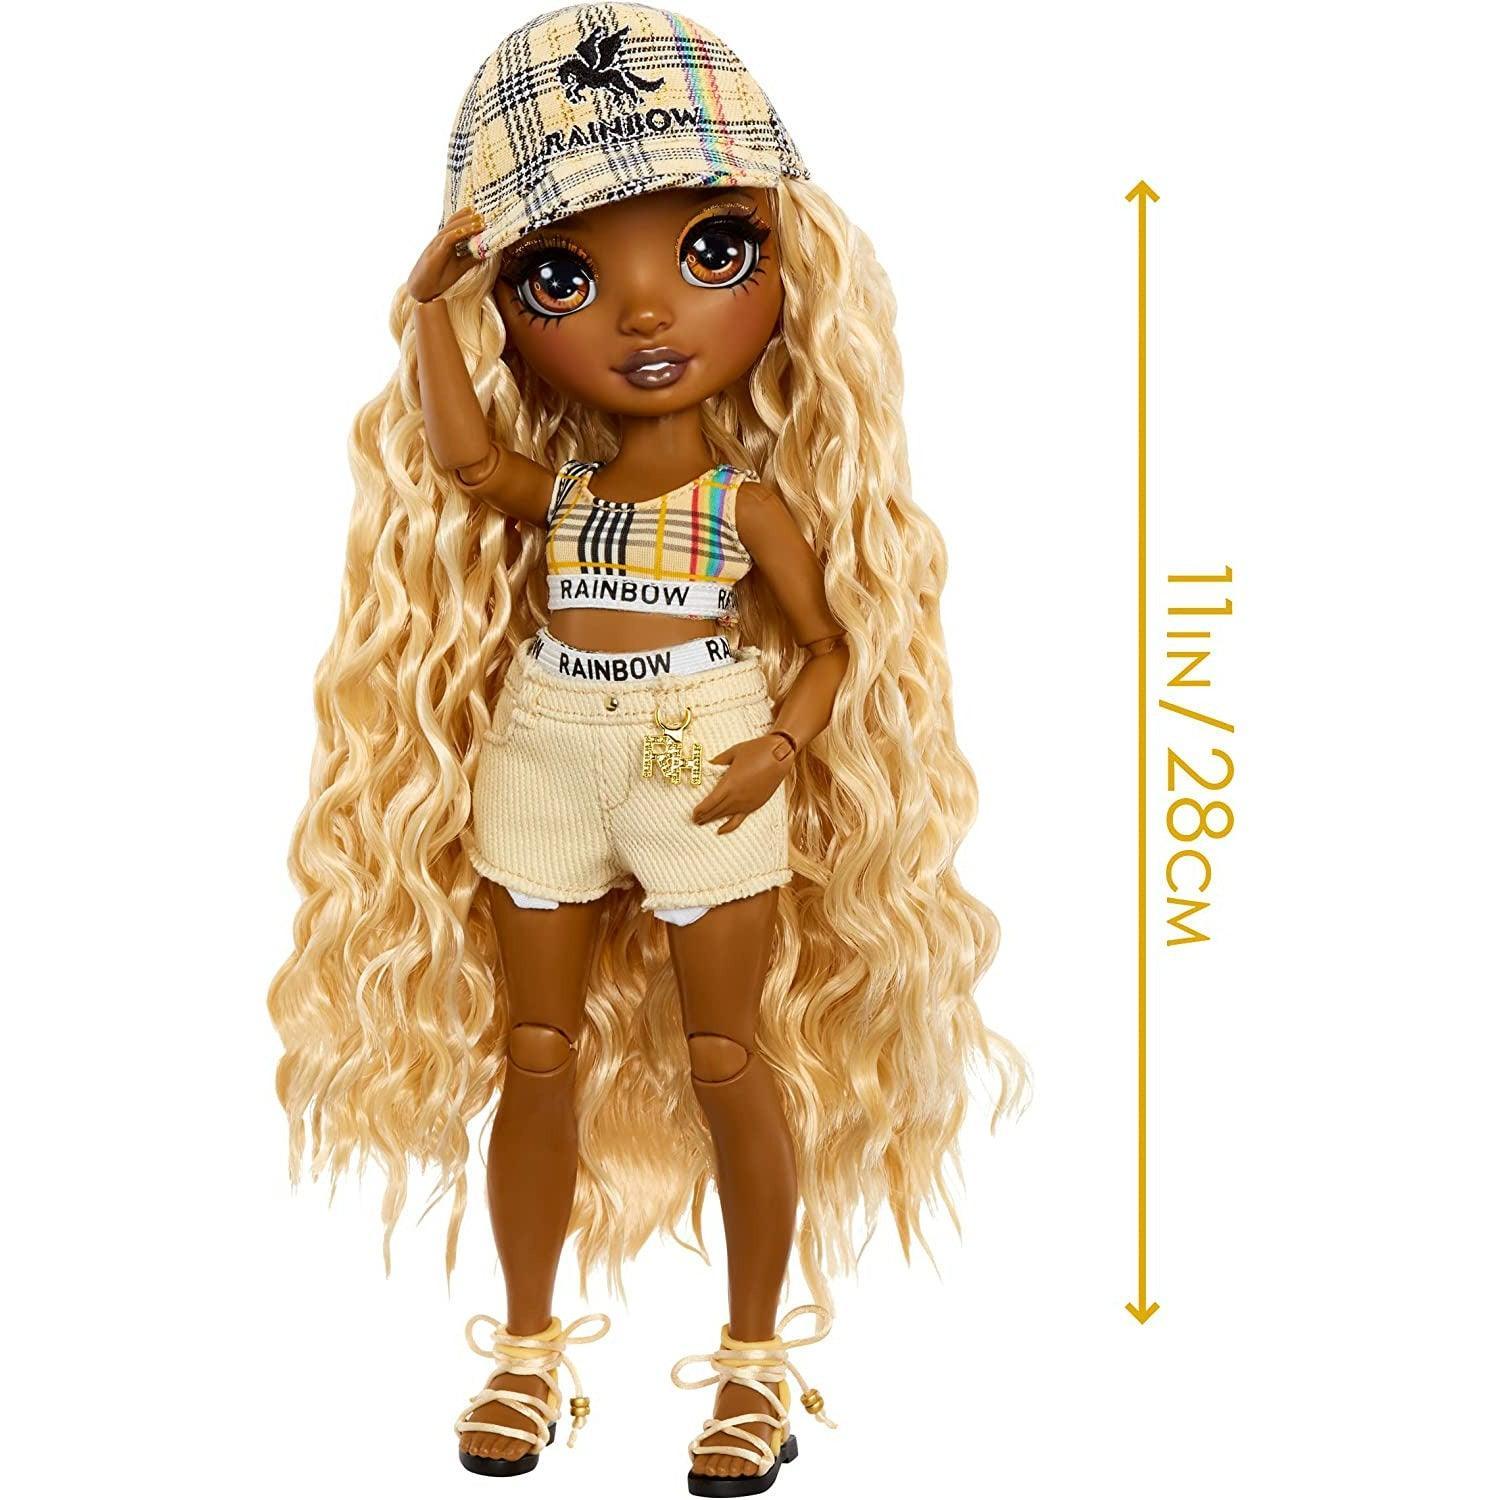 Rainbow High Pacific Coast Harper Dune- Sand (Light Yellow) Fashion Doll with 2 Designer Outfits, Pool Accessories Playset - BumbleToys - 5-7 Years, 8-13 Years, Girls, Makeup, Roleplay, Toy Land